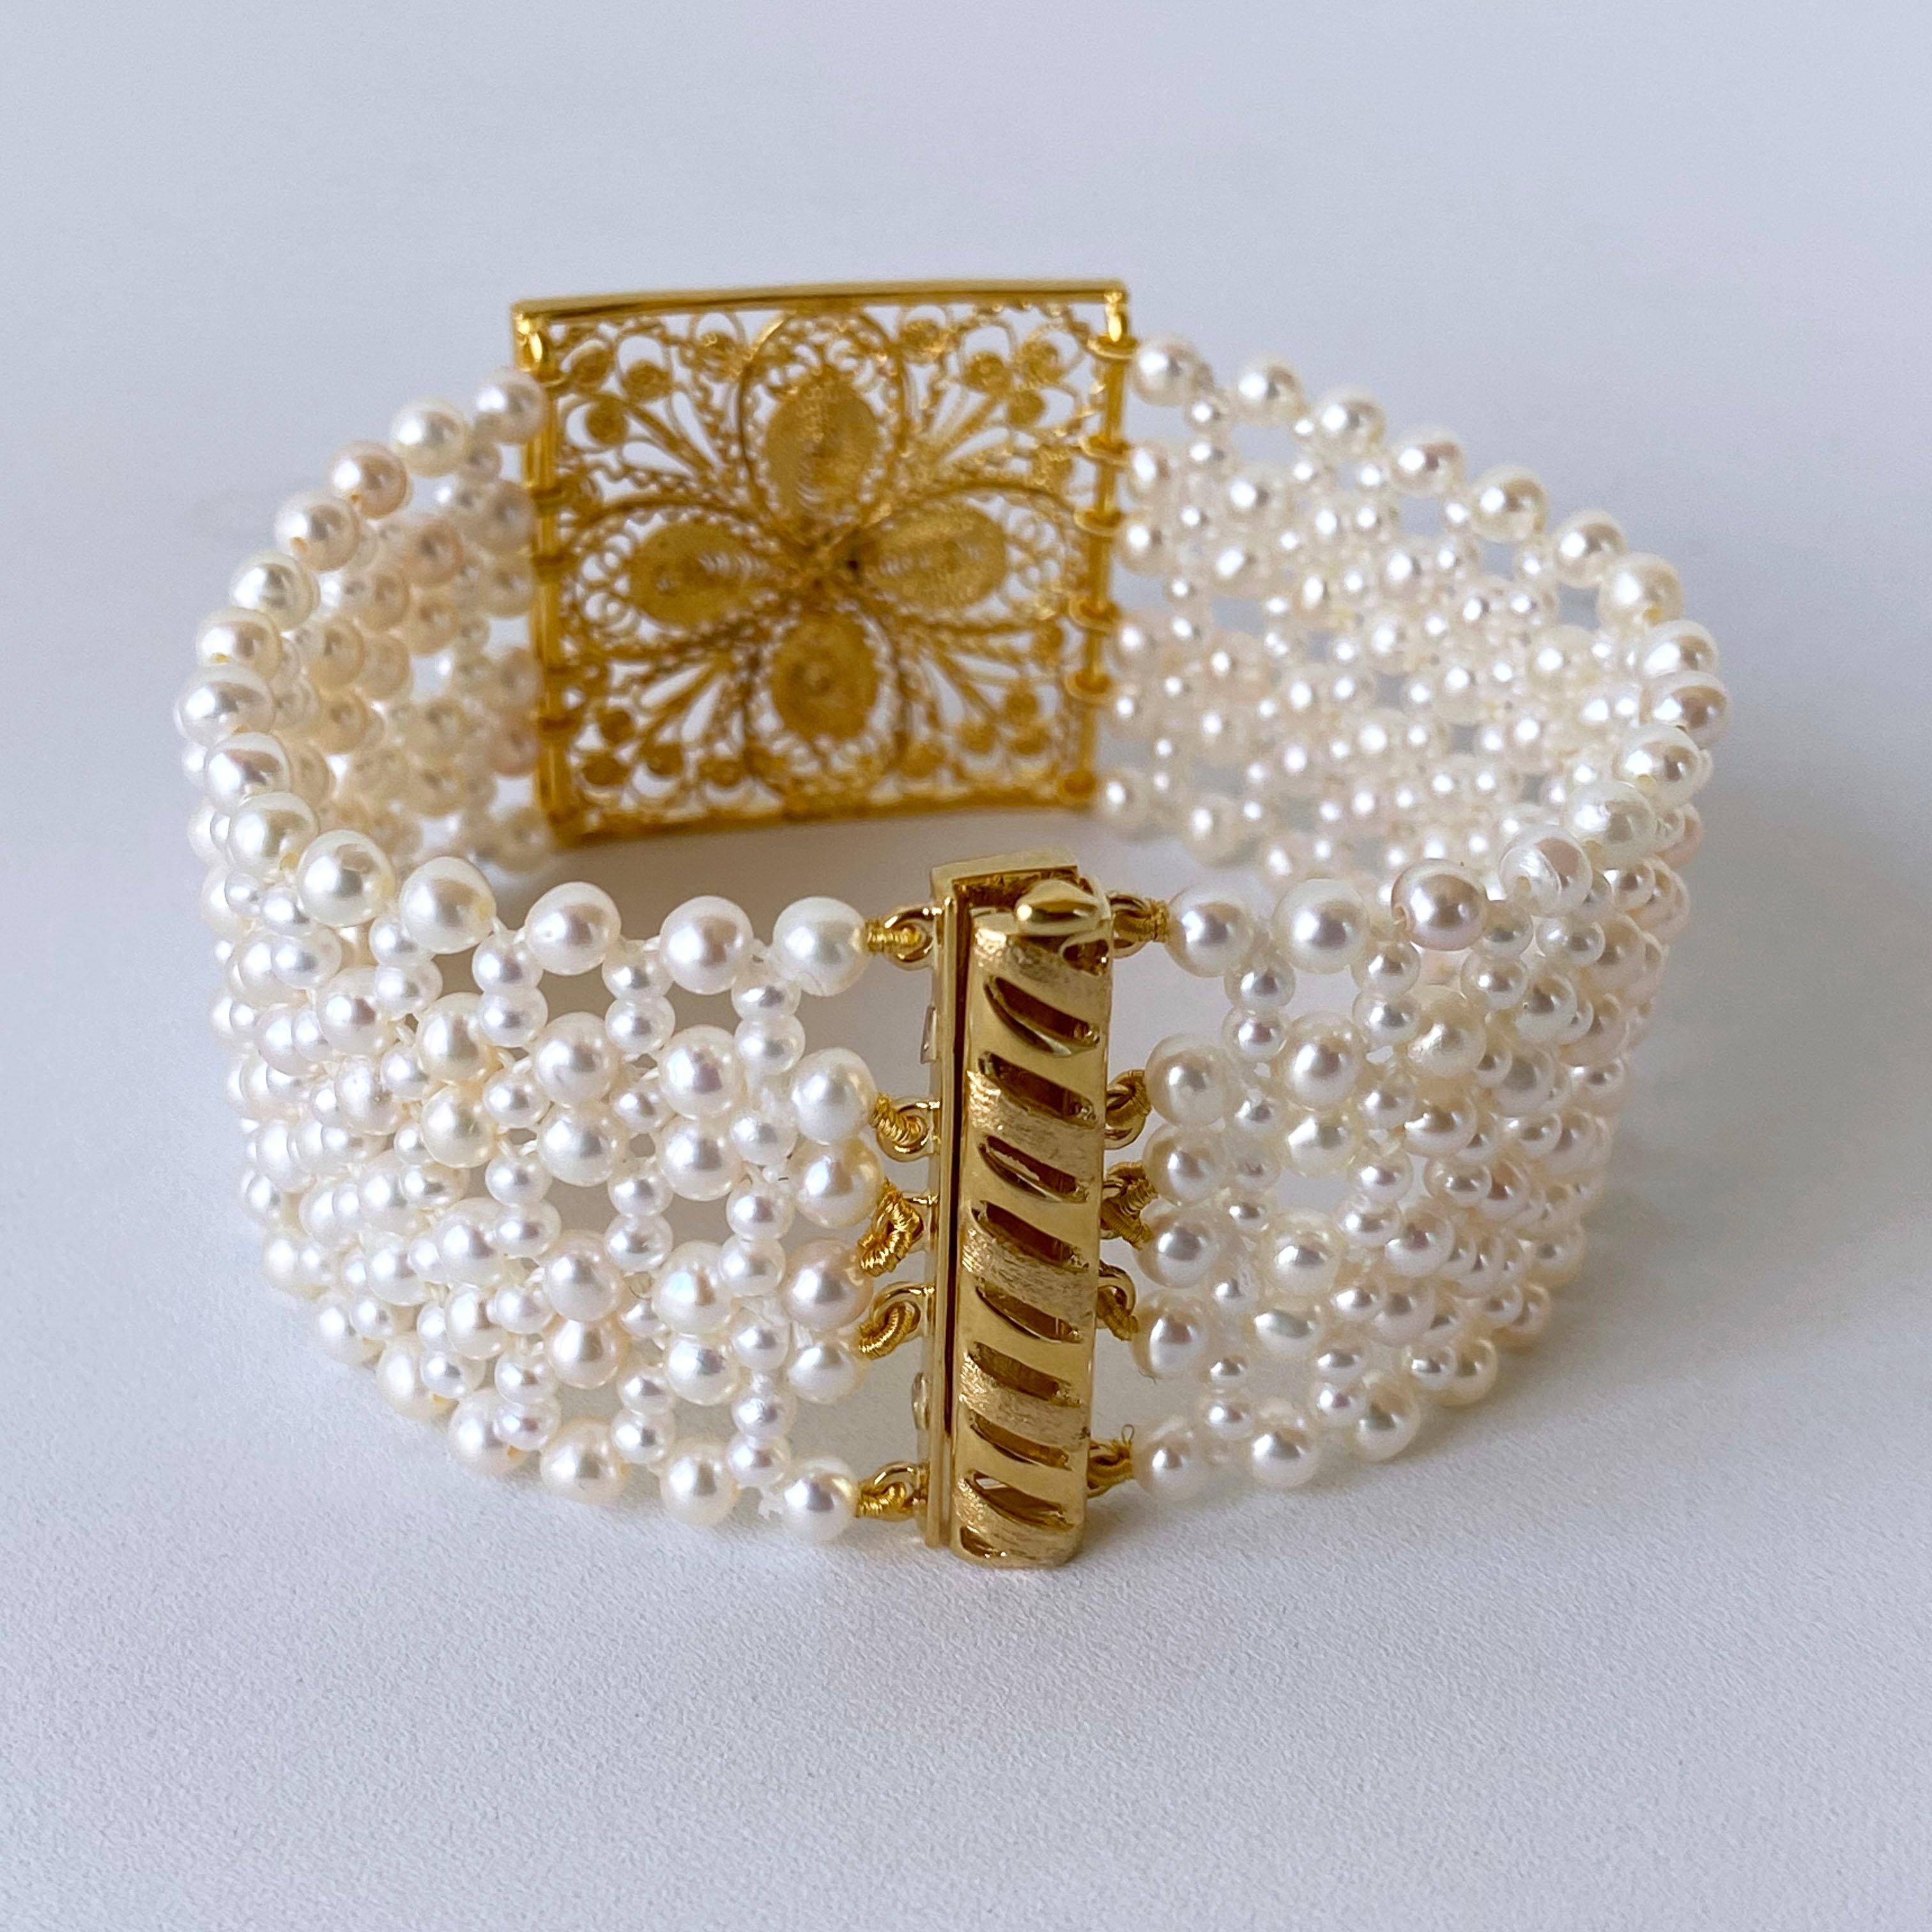 Marina J. Woven Pearl Bracelet with 18k Yellow Gold Floral Centerpiece & Clasp 1